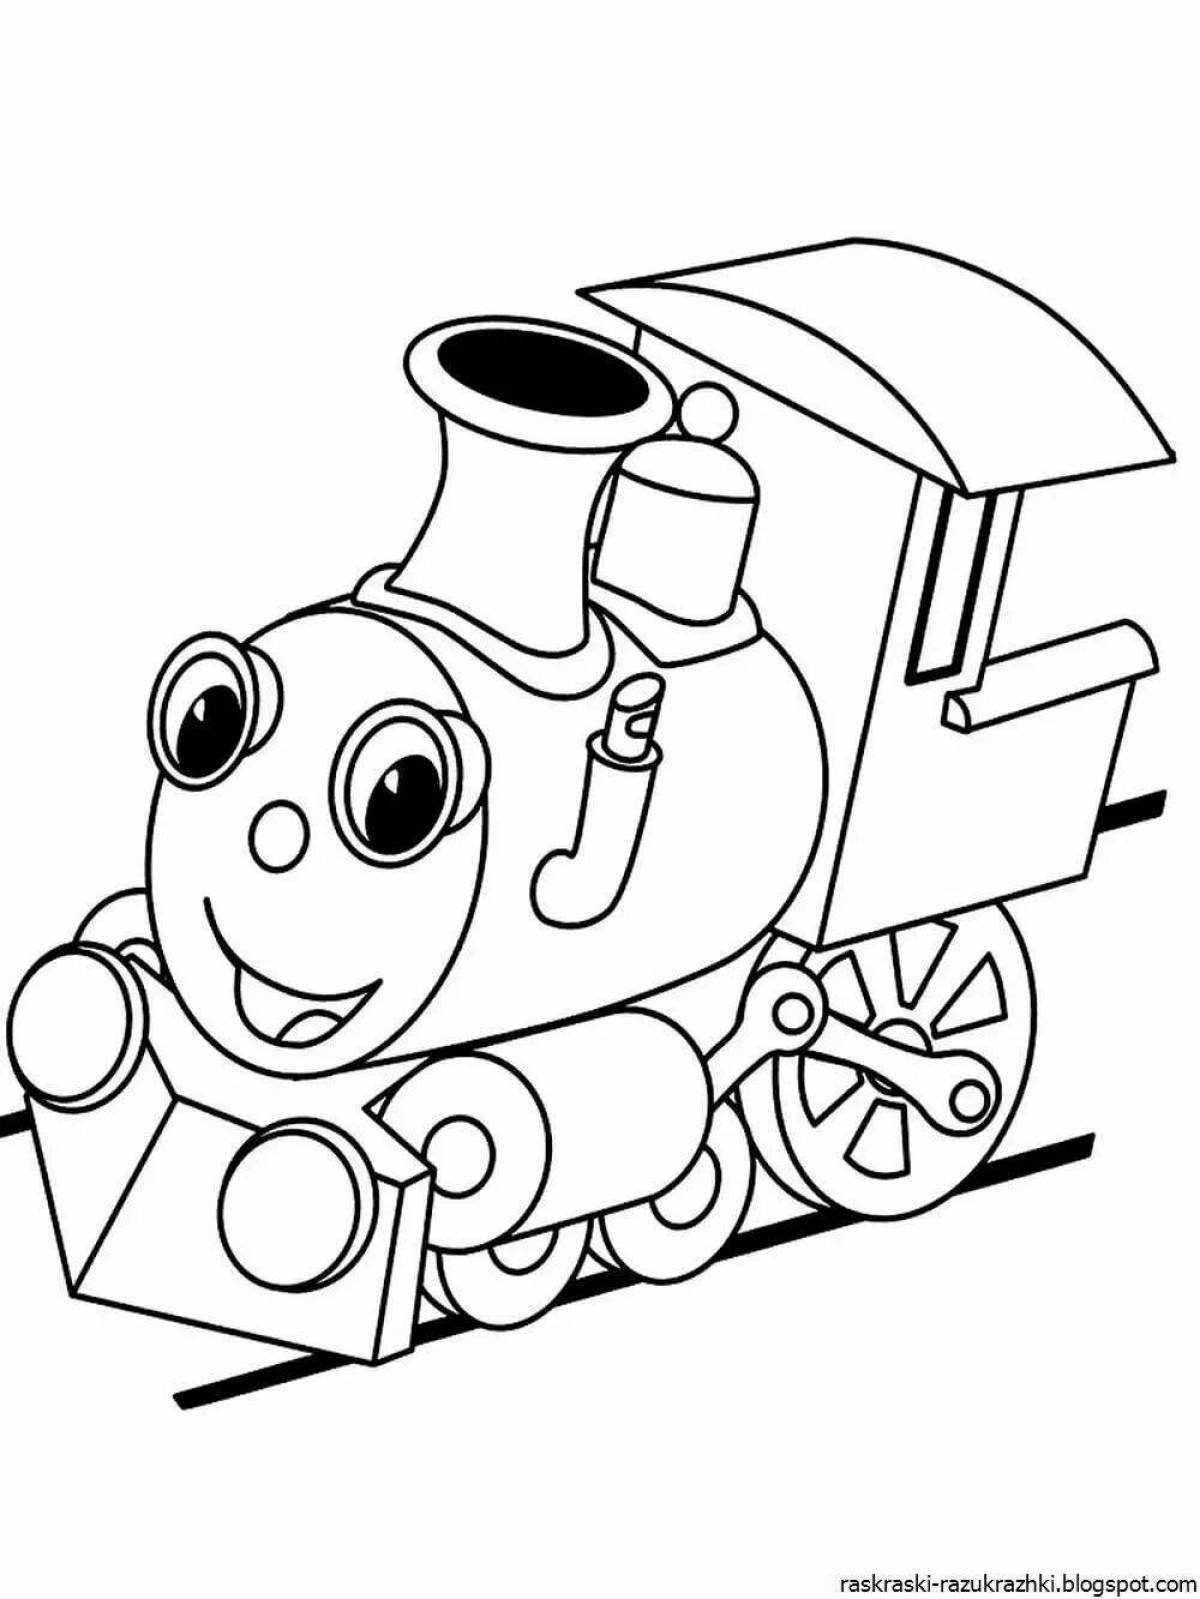 Fun train coloring book for 3-4 year olds